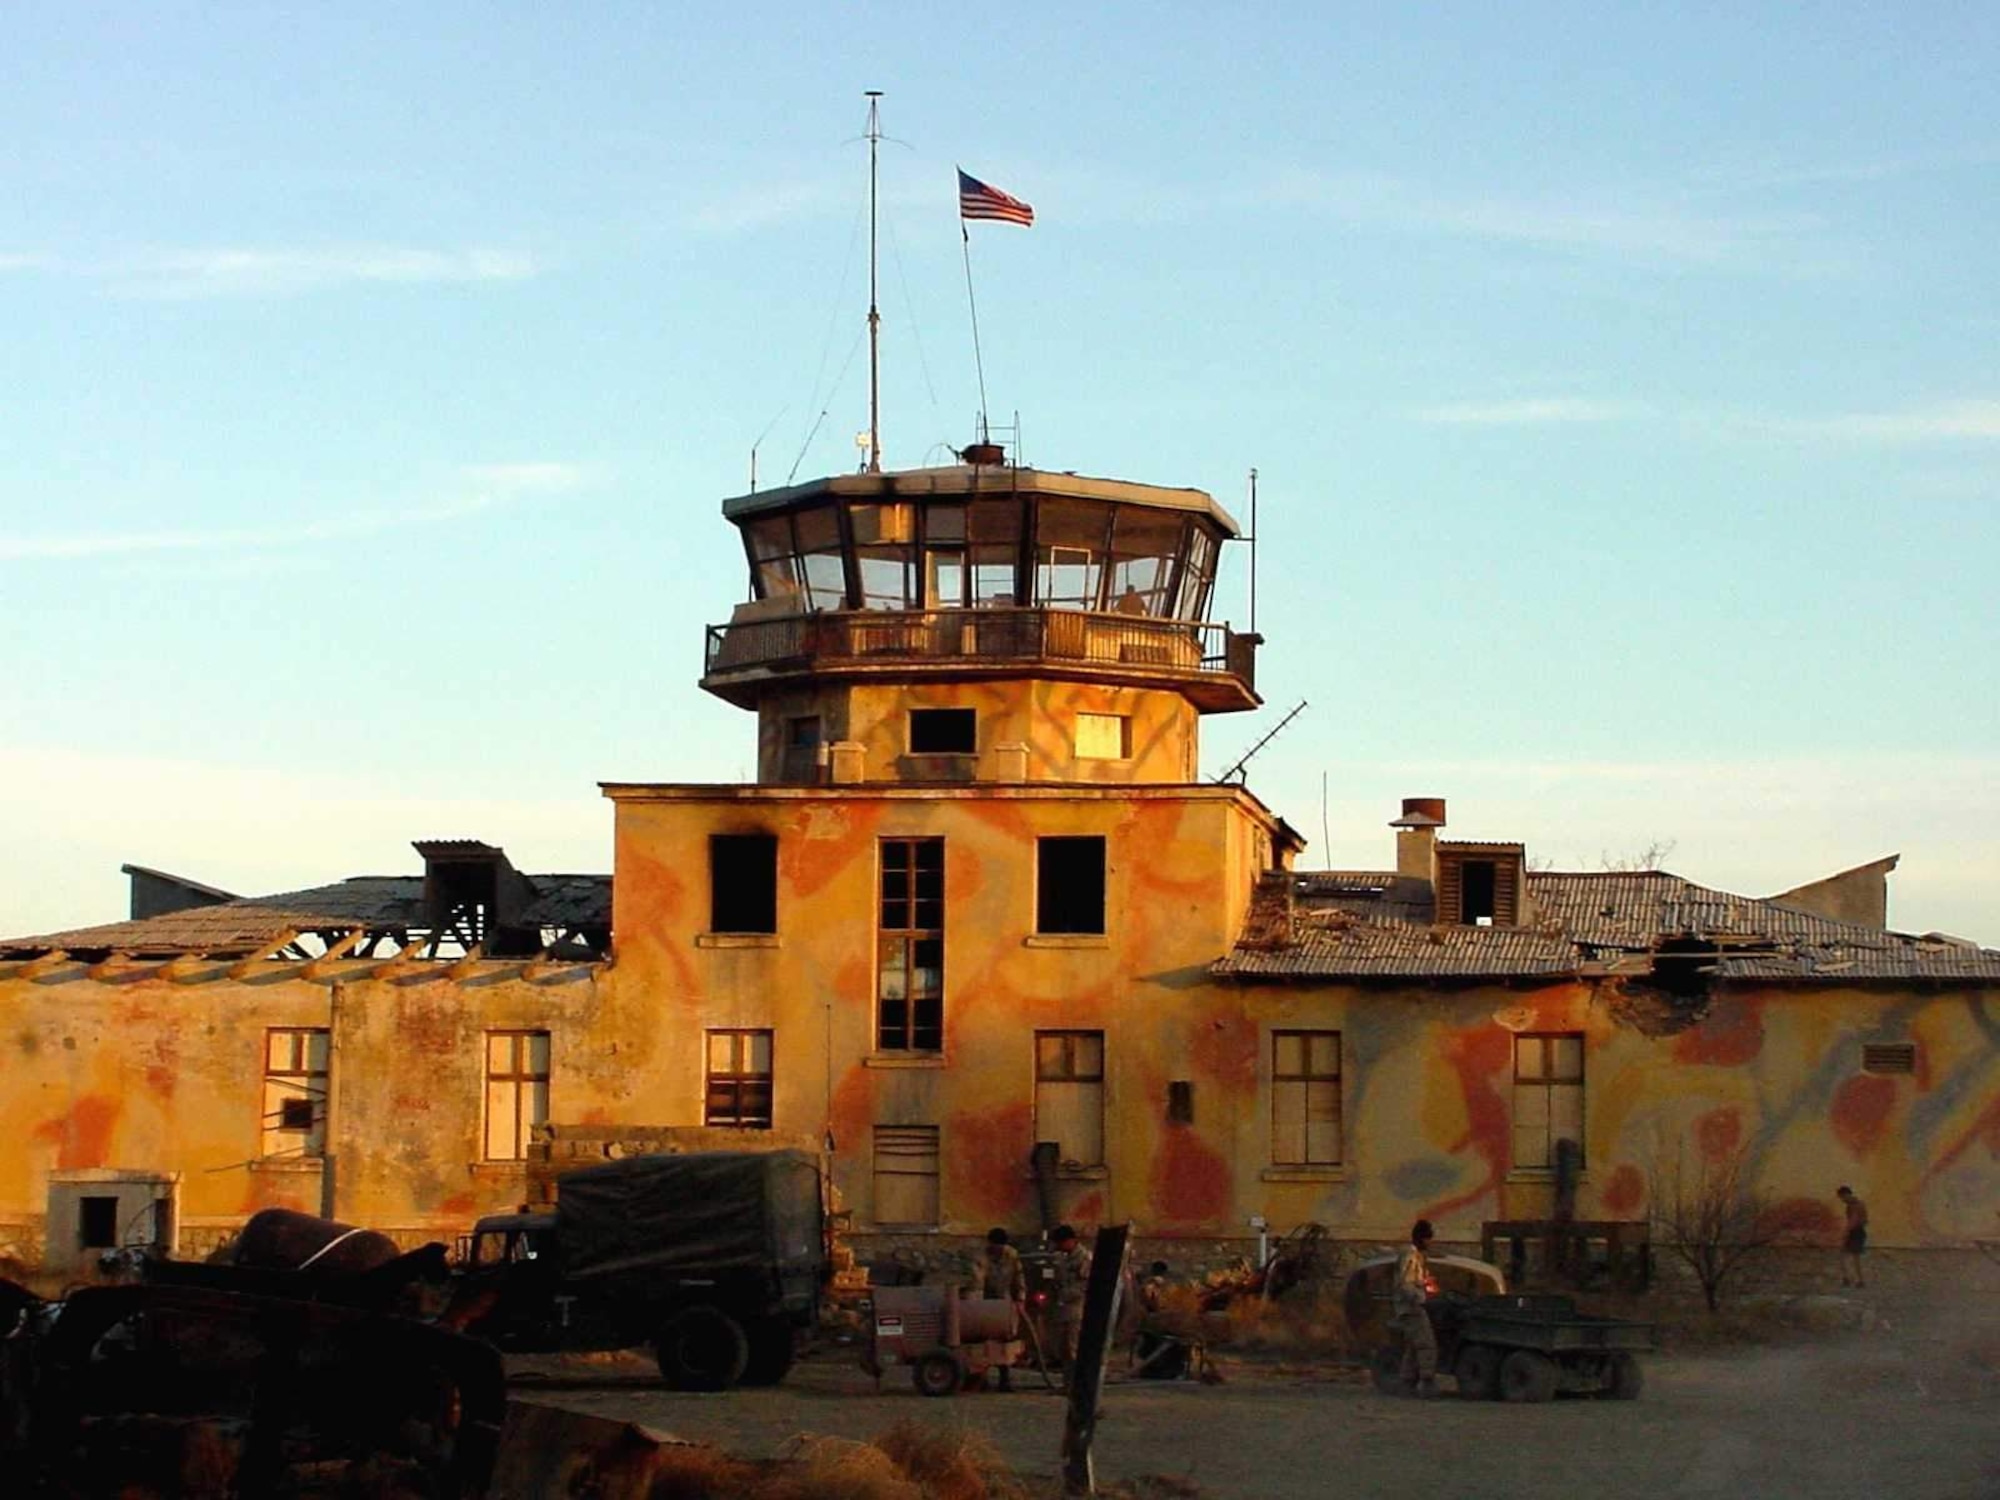 The old Russian control tower as it appeared when the first U.S. forces arrived on Bagram Airfield in December 2001. In this photo, painted camoflauge and holes are visibile in the tower's exterior roof. The tower, which is a familiar landmark to deployed service members and civilians who have worked here, was built on Bagram Airfield in 1976 during the Soviet Union's economic collaboration with Afghanistan.(Courtesy photo)